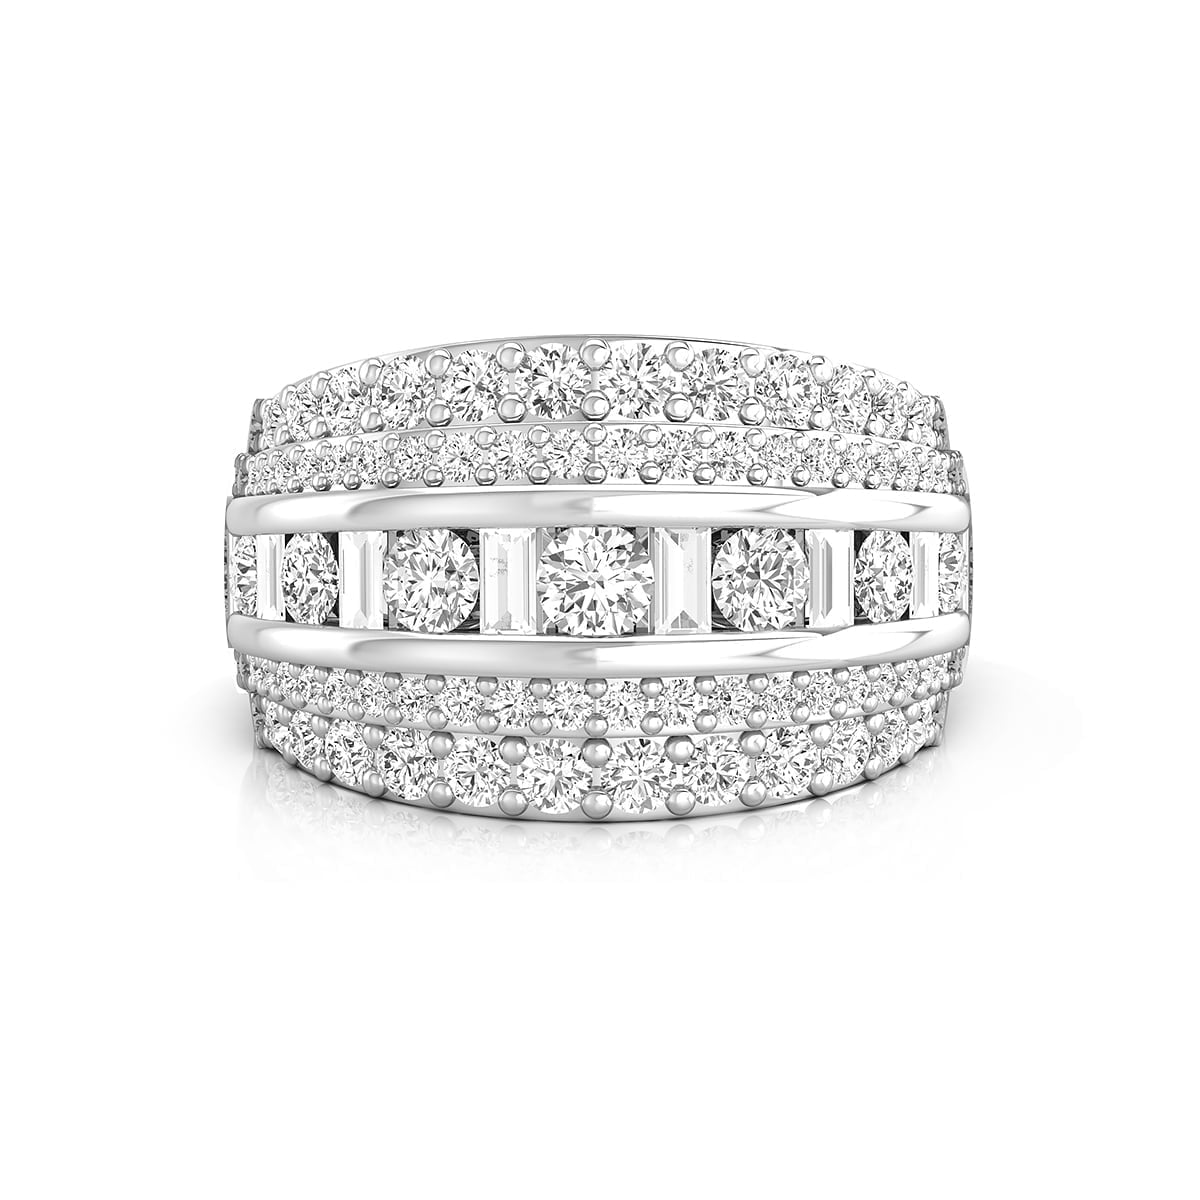 Round With Baguette Cut CZ Stone Channel Setting Wedding Band Ring